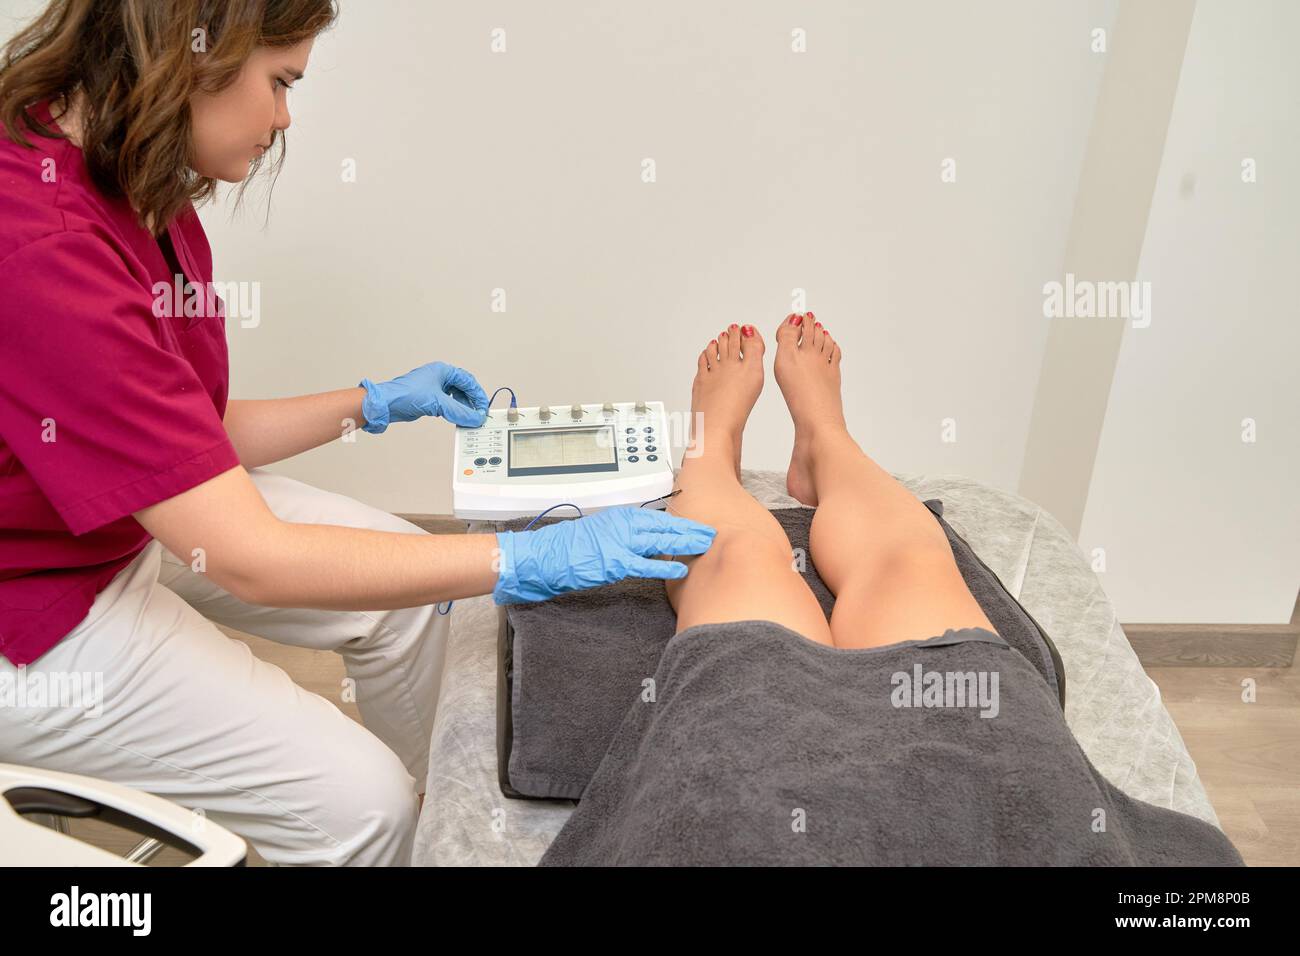 A physical therapist performs percutaneous electrolysis treatment on a patient's leg using advanced electrotherapy equipment and techniques to relieve pain. Stock Photo